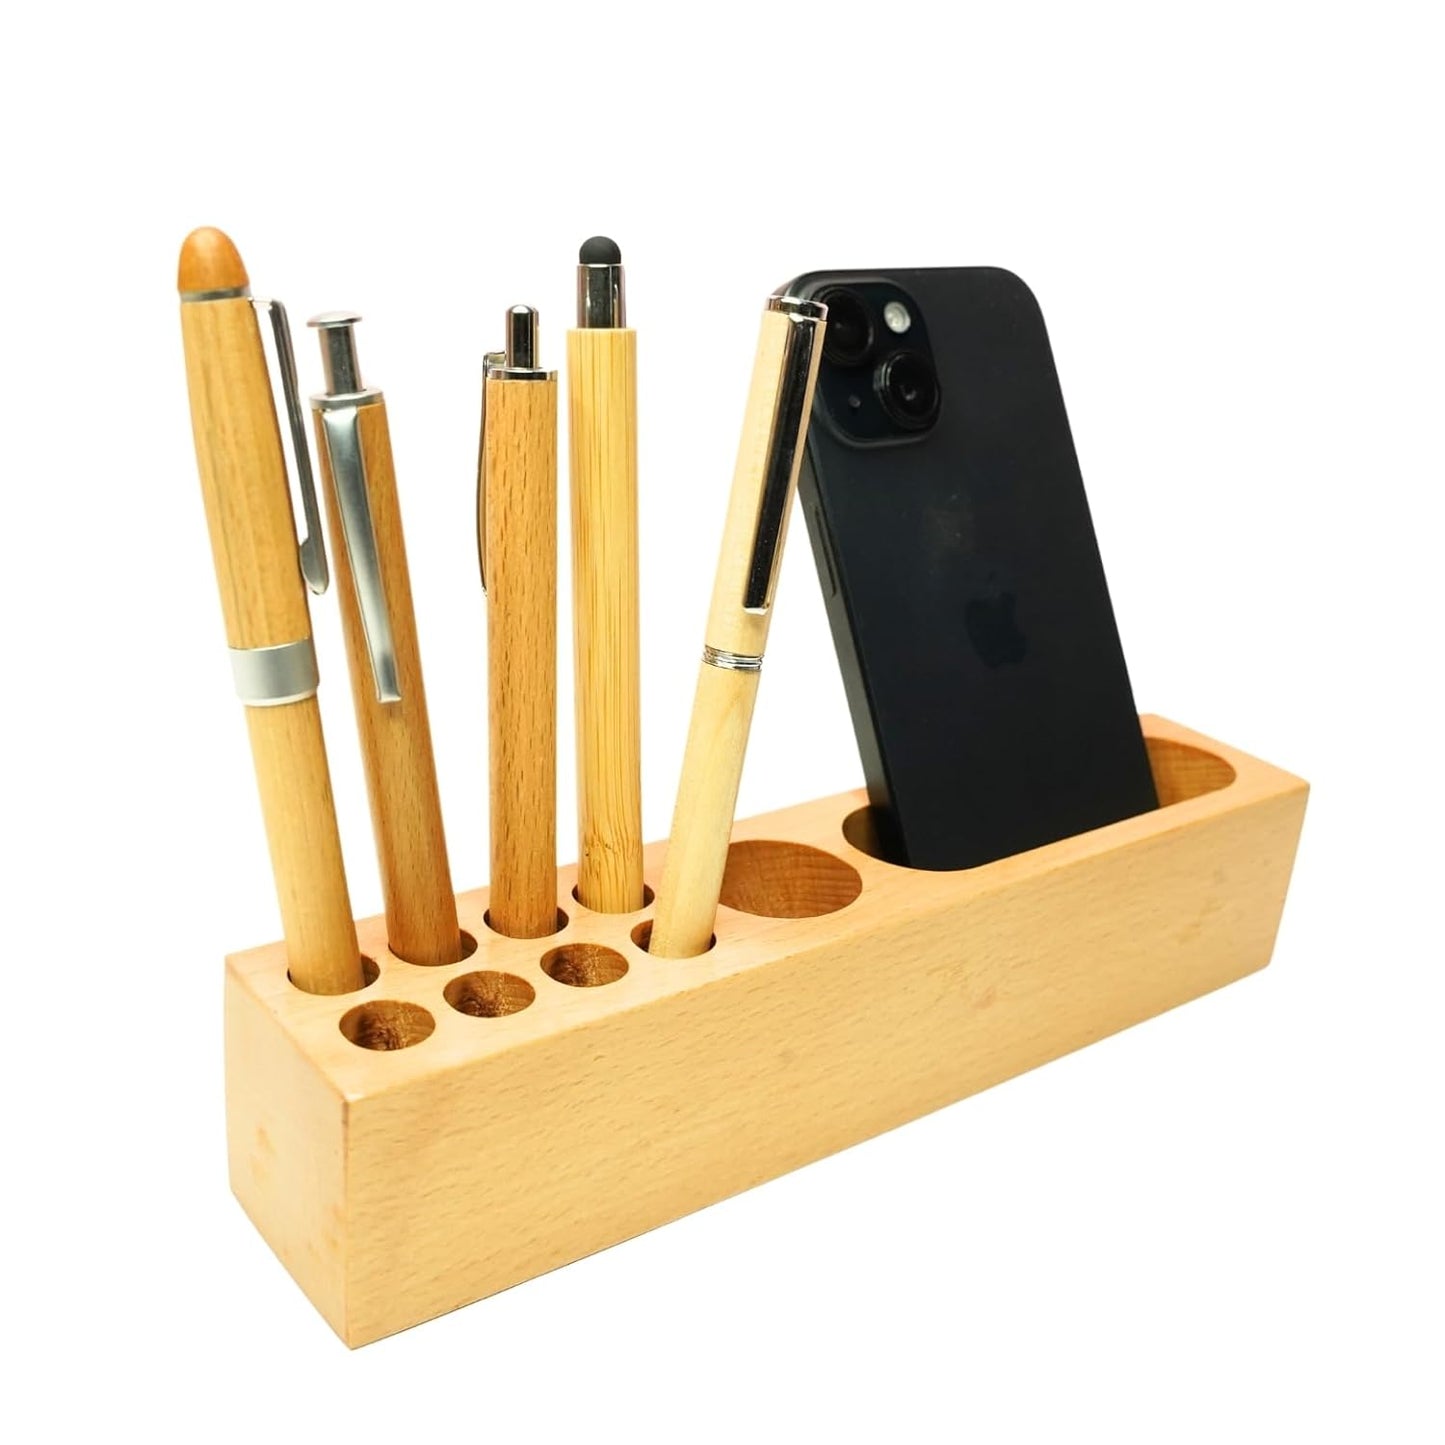 Craft Closet & Gifts - Personalized Steam Beech Wooden Desk Supplies Organizer with 8 Pen/Pencil Holder Stand & Mobile Holder For IAS, Advocates, Office & Corporate Gifts (Customized)